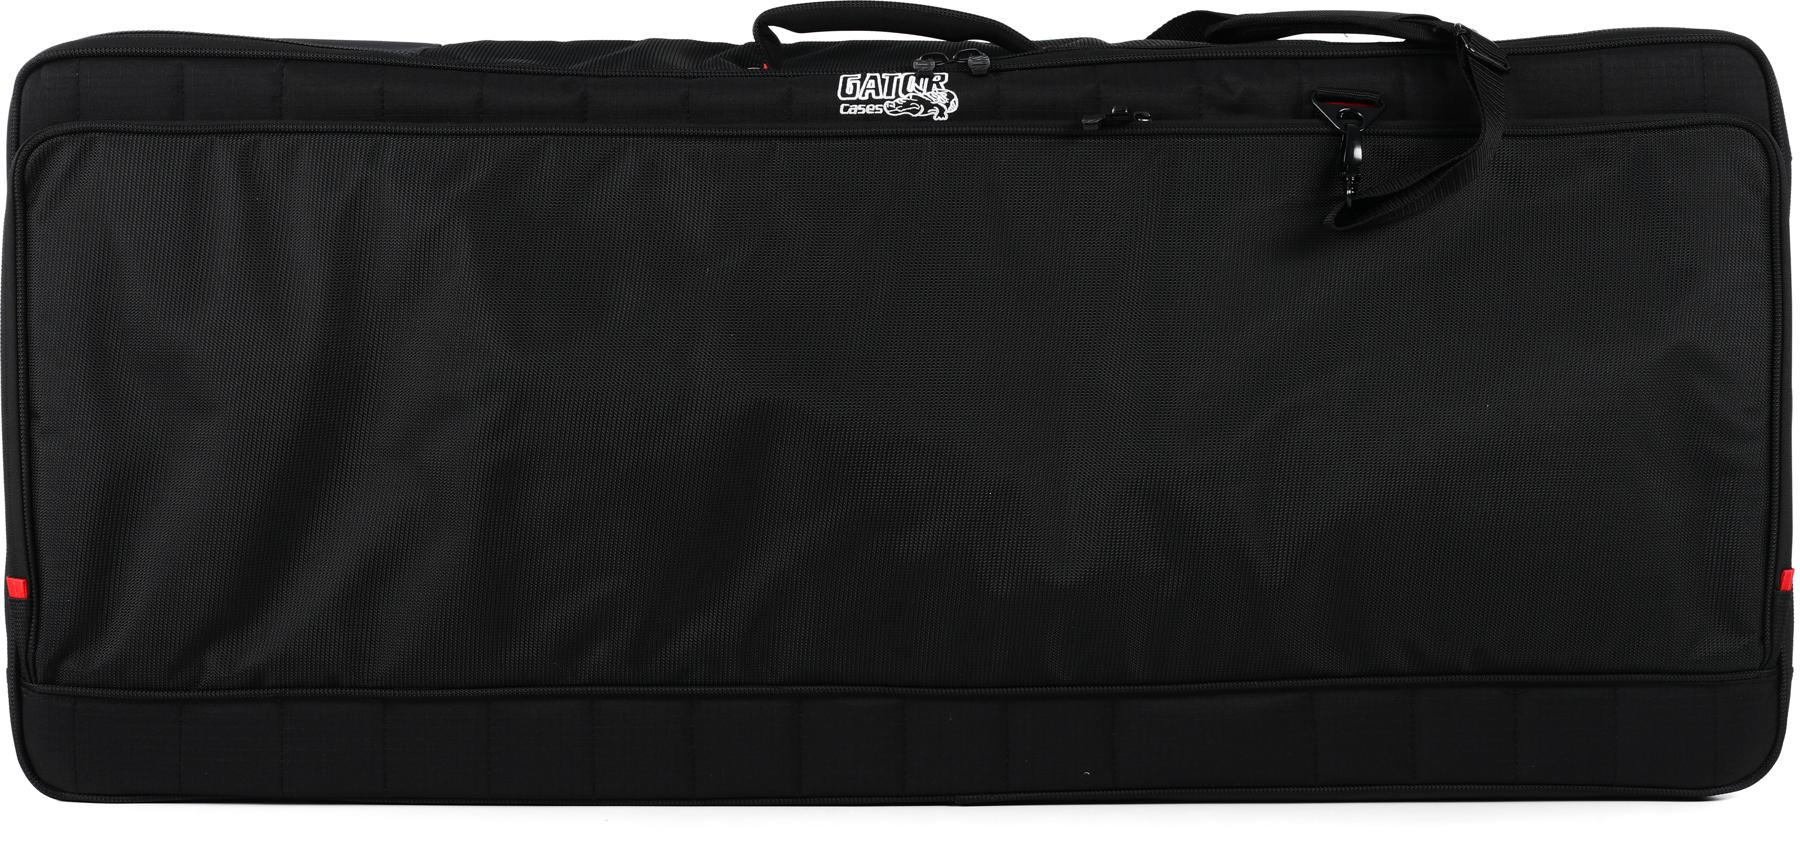 Baritone Distribution Case For Heavy Padded Quality Keyboard Full Black Gig Bag For Yamaha PSR-S775 61-Key Size 41X19X8 Inches